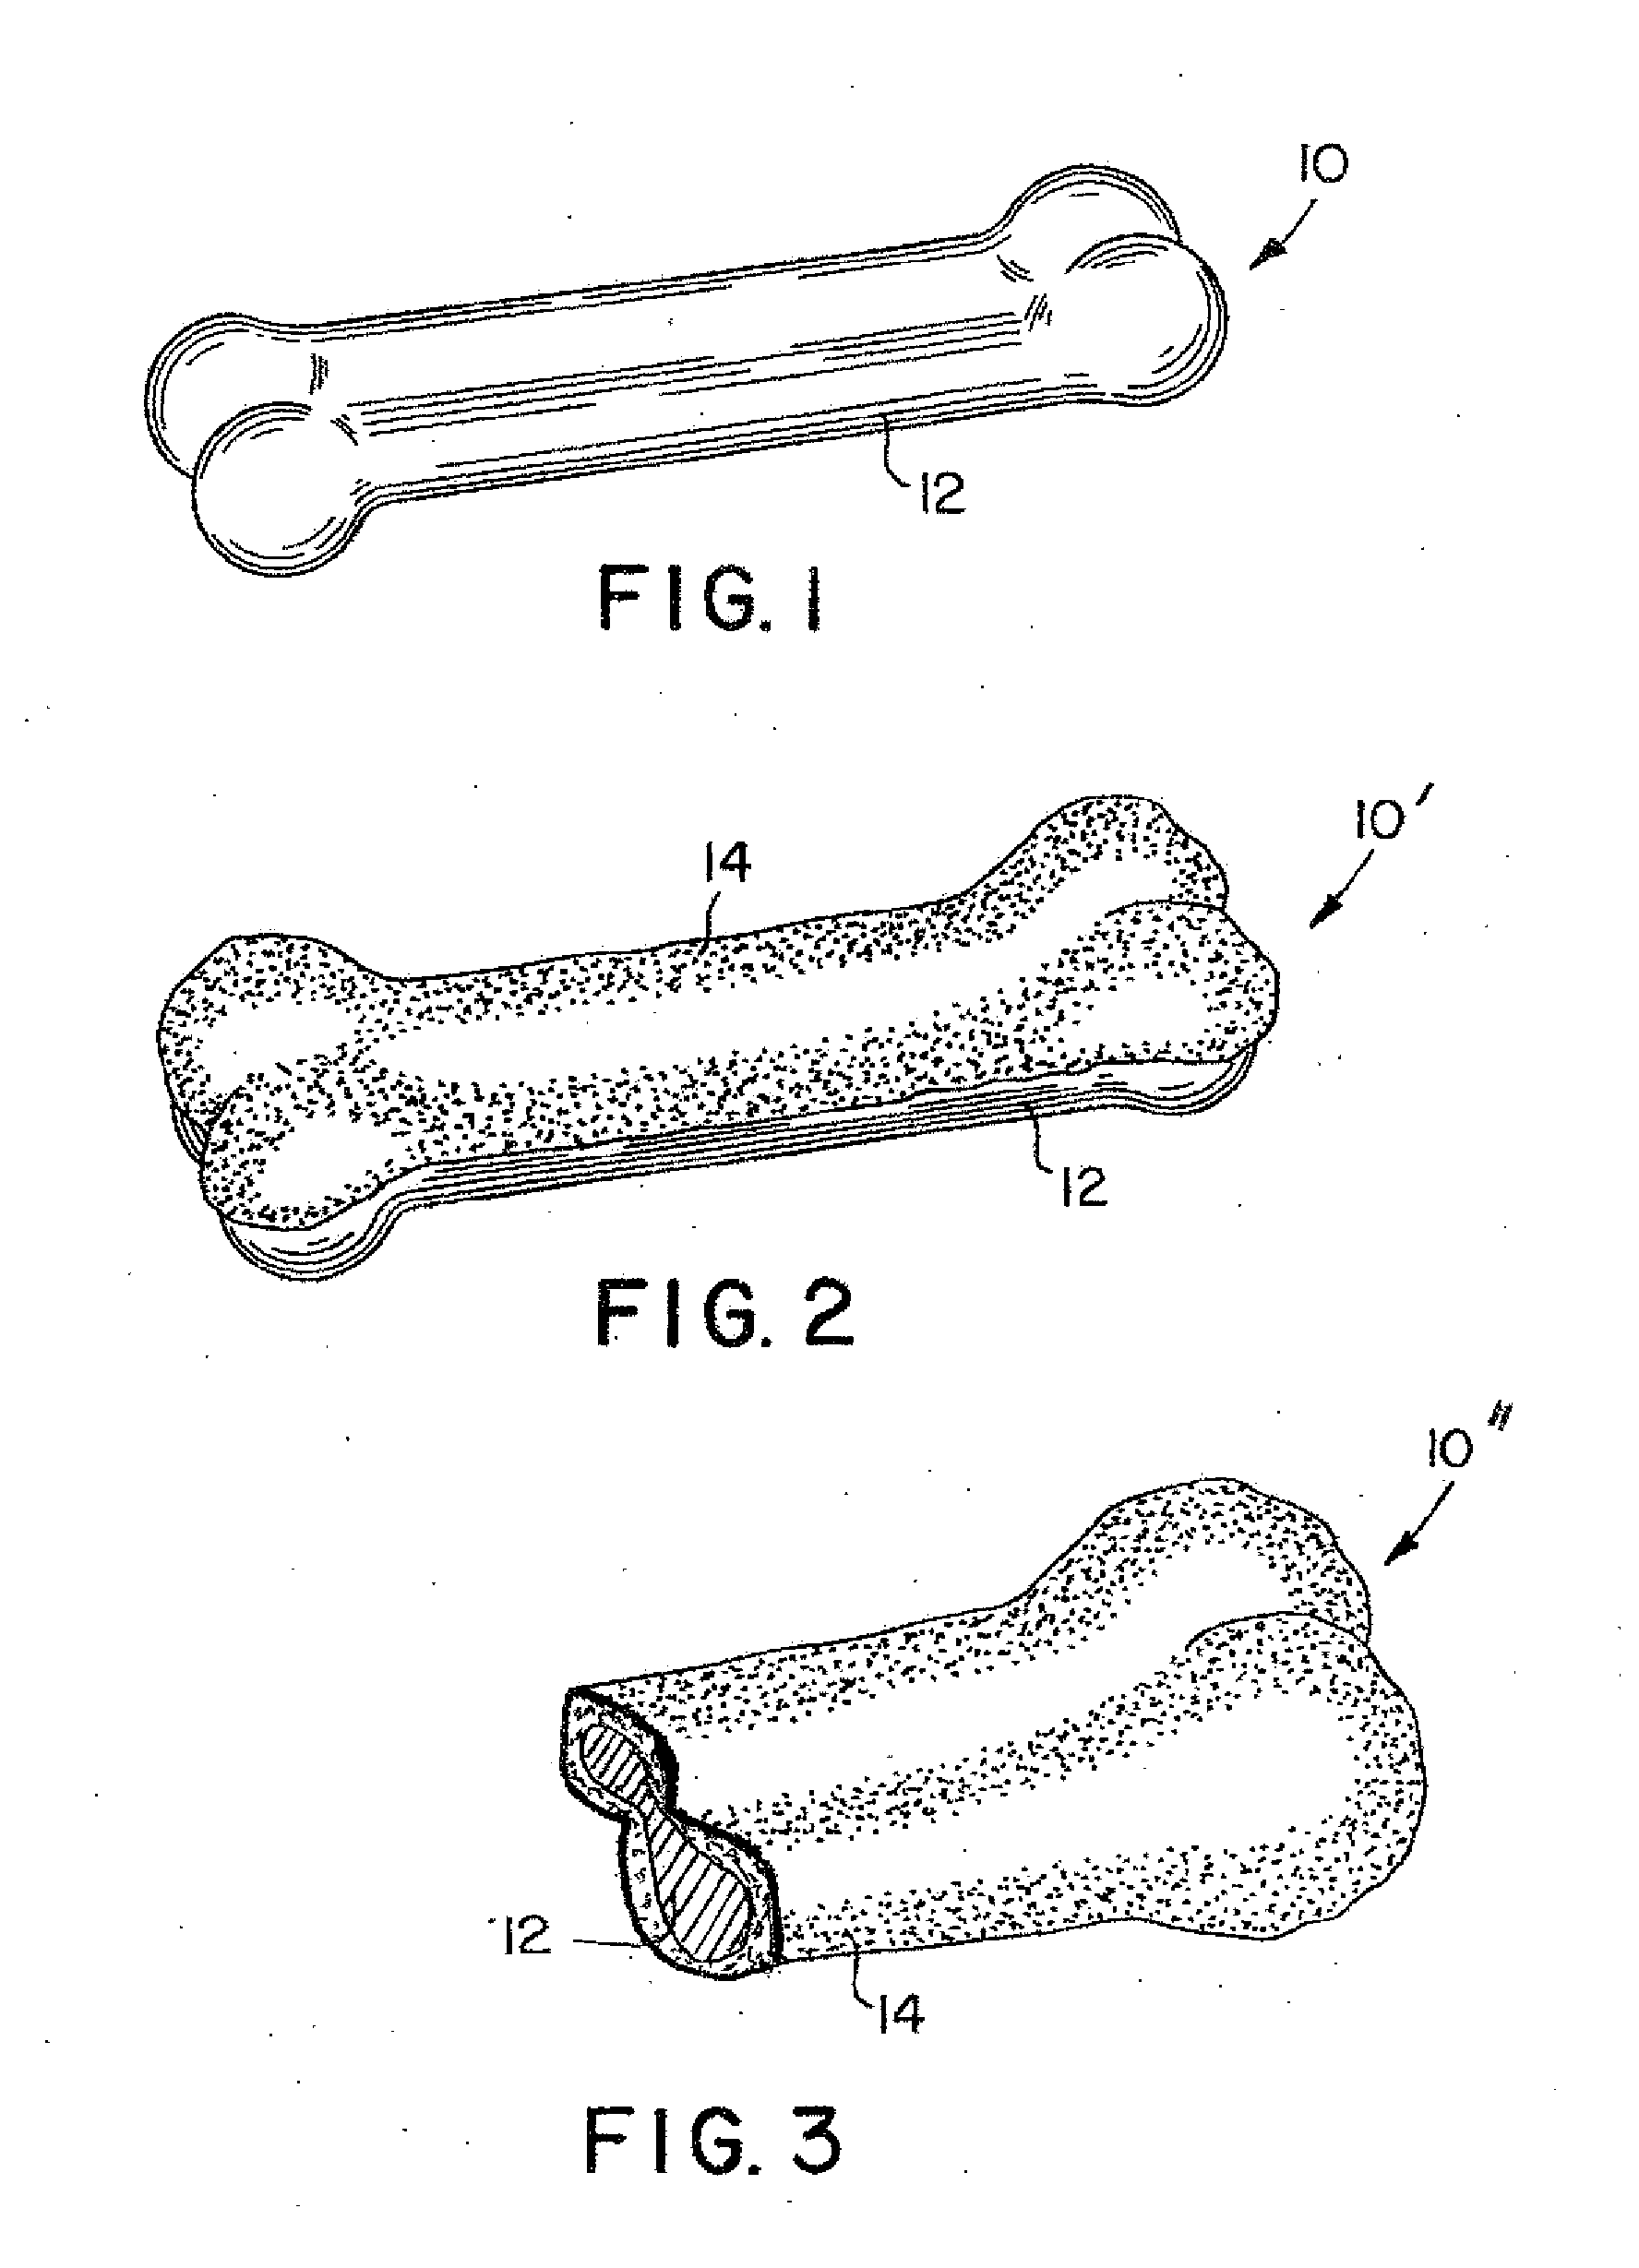 Processes For Forming Multi-Layered Pet Treats